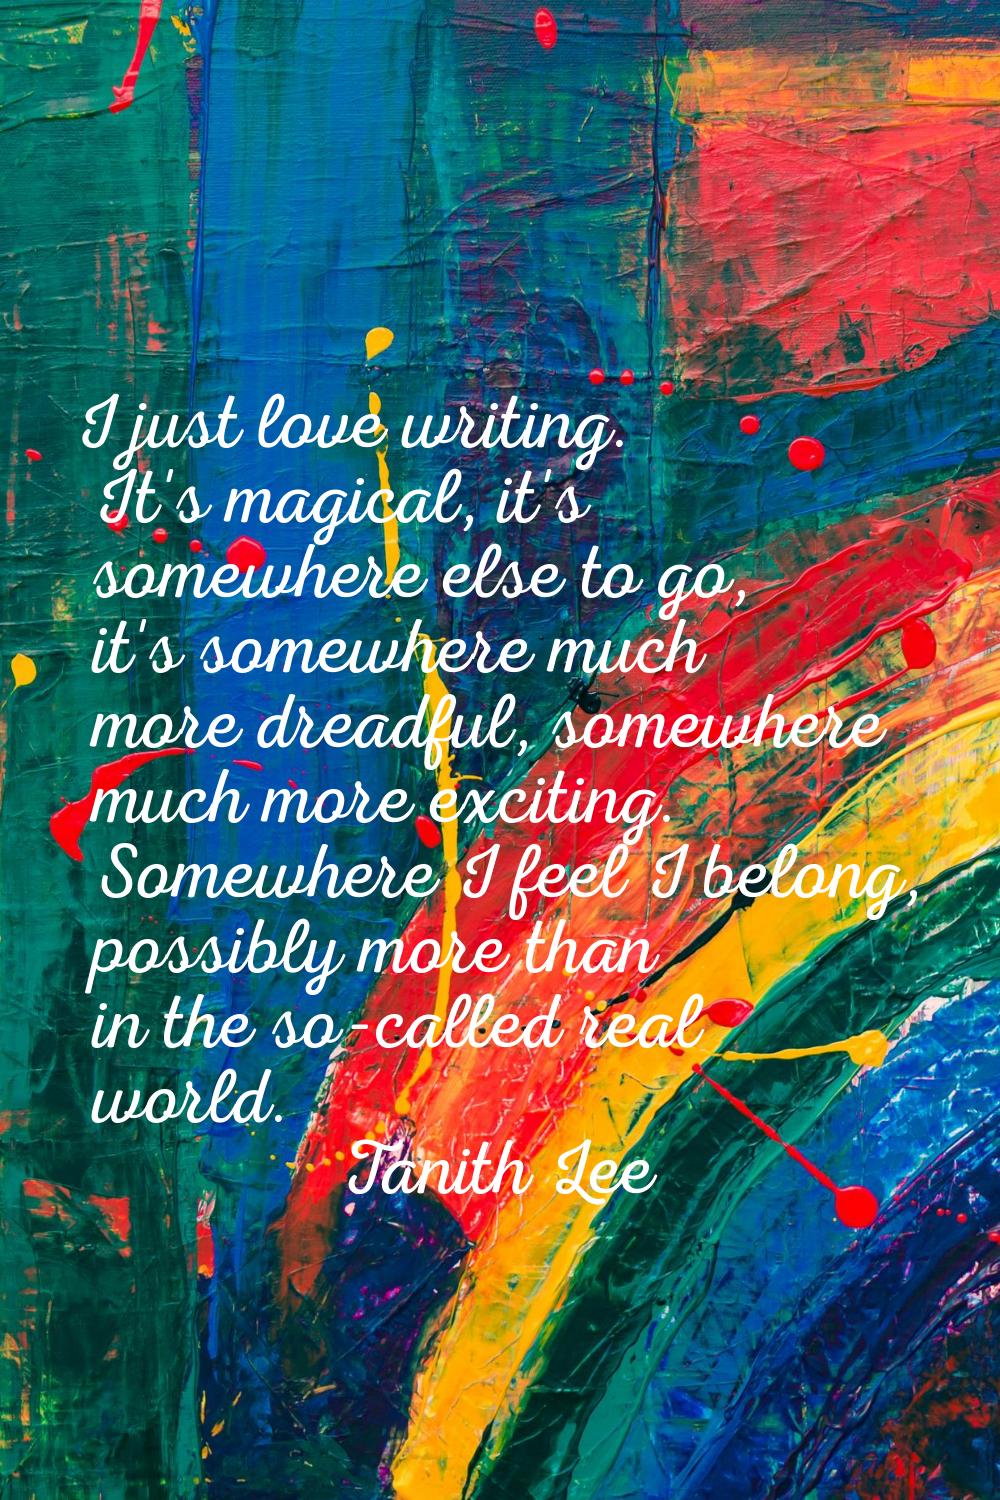 I just love writing. It's magical, it's somewhere else to go, it's somewhere much more dreadful, so